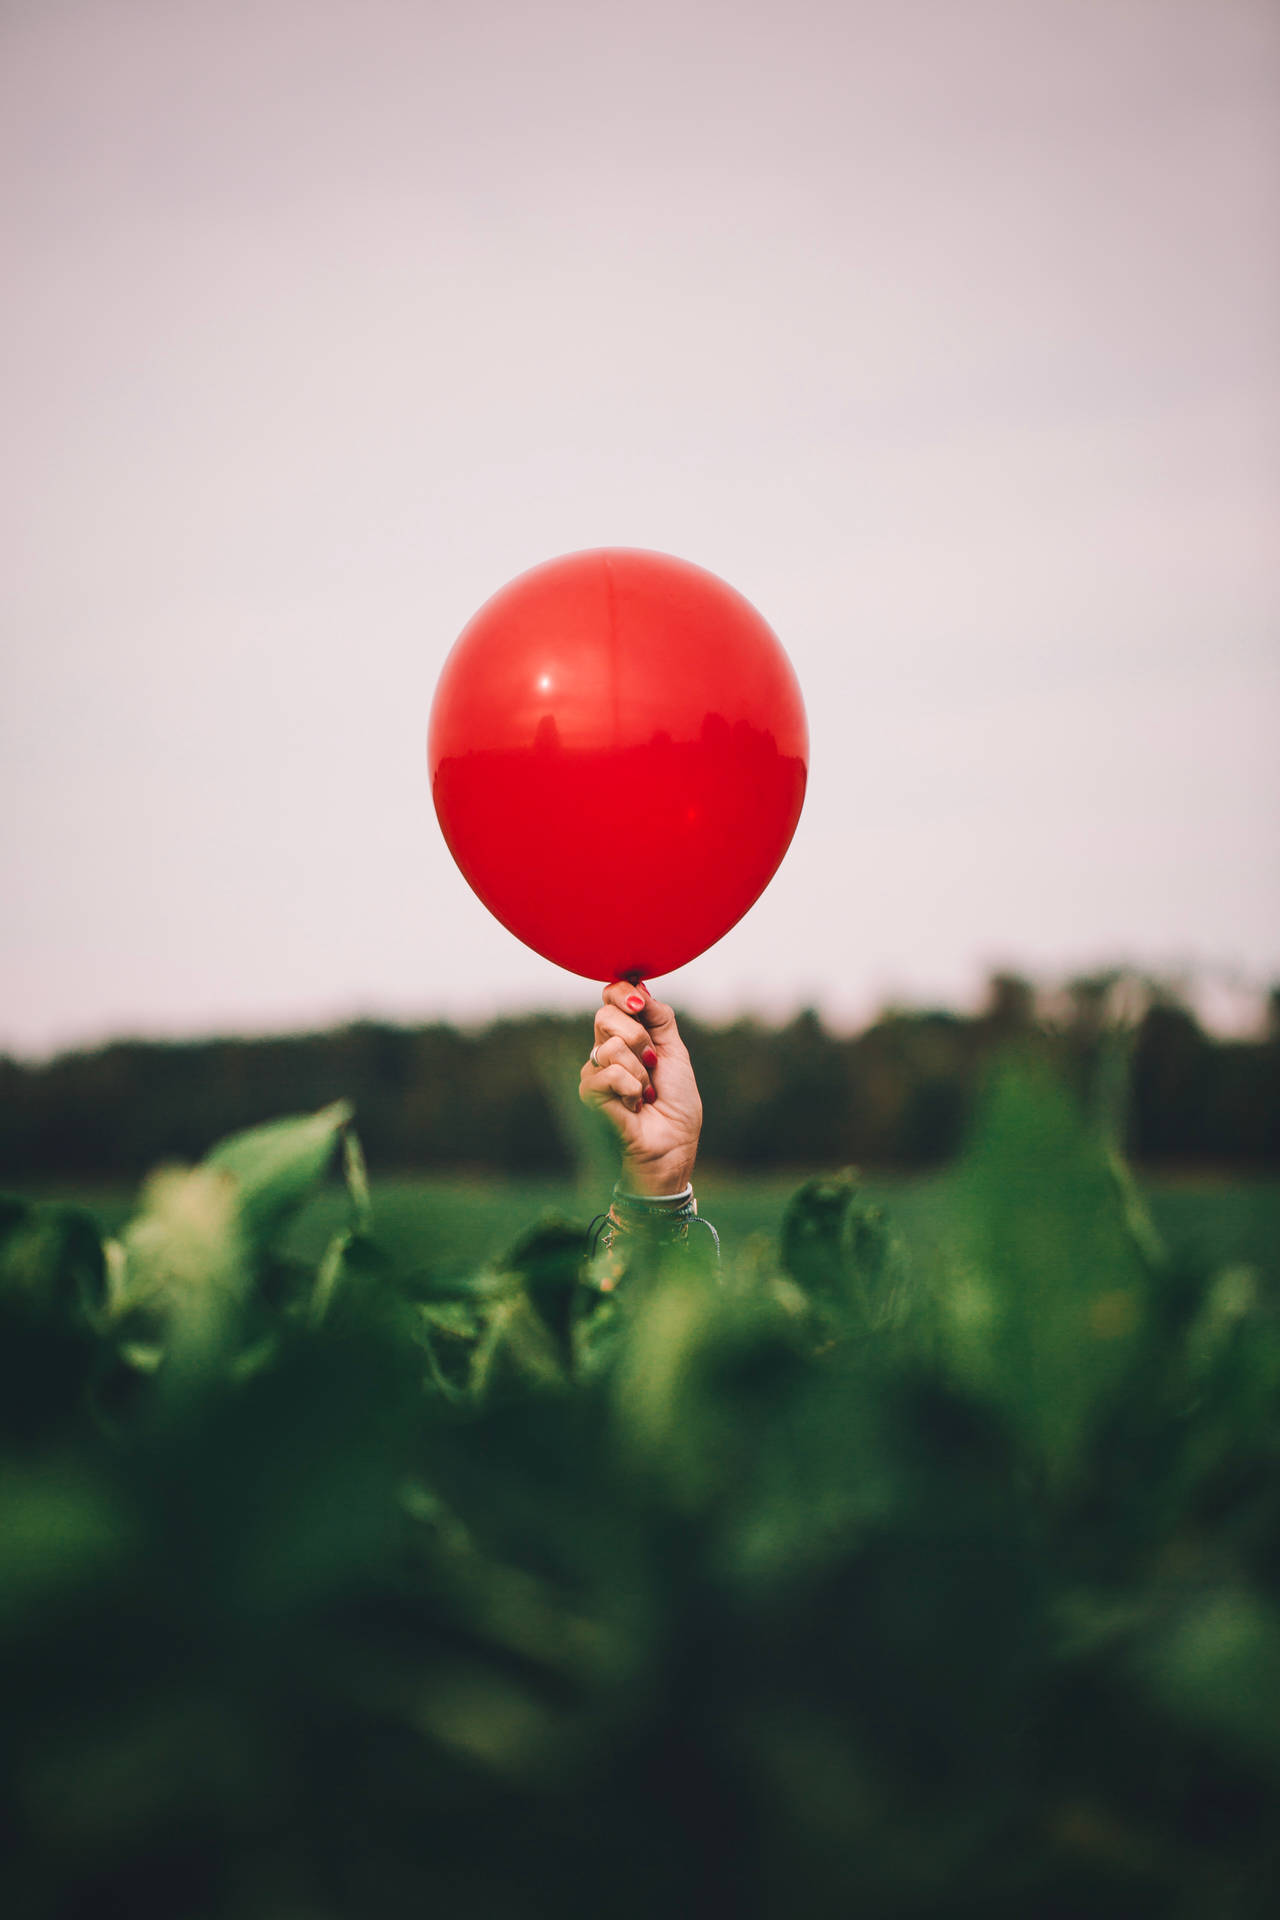 Red Glossy Balloon Over Green Plants